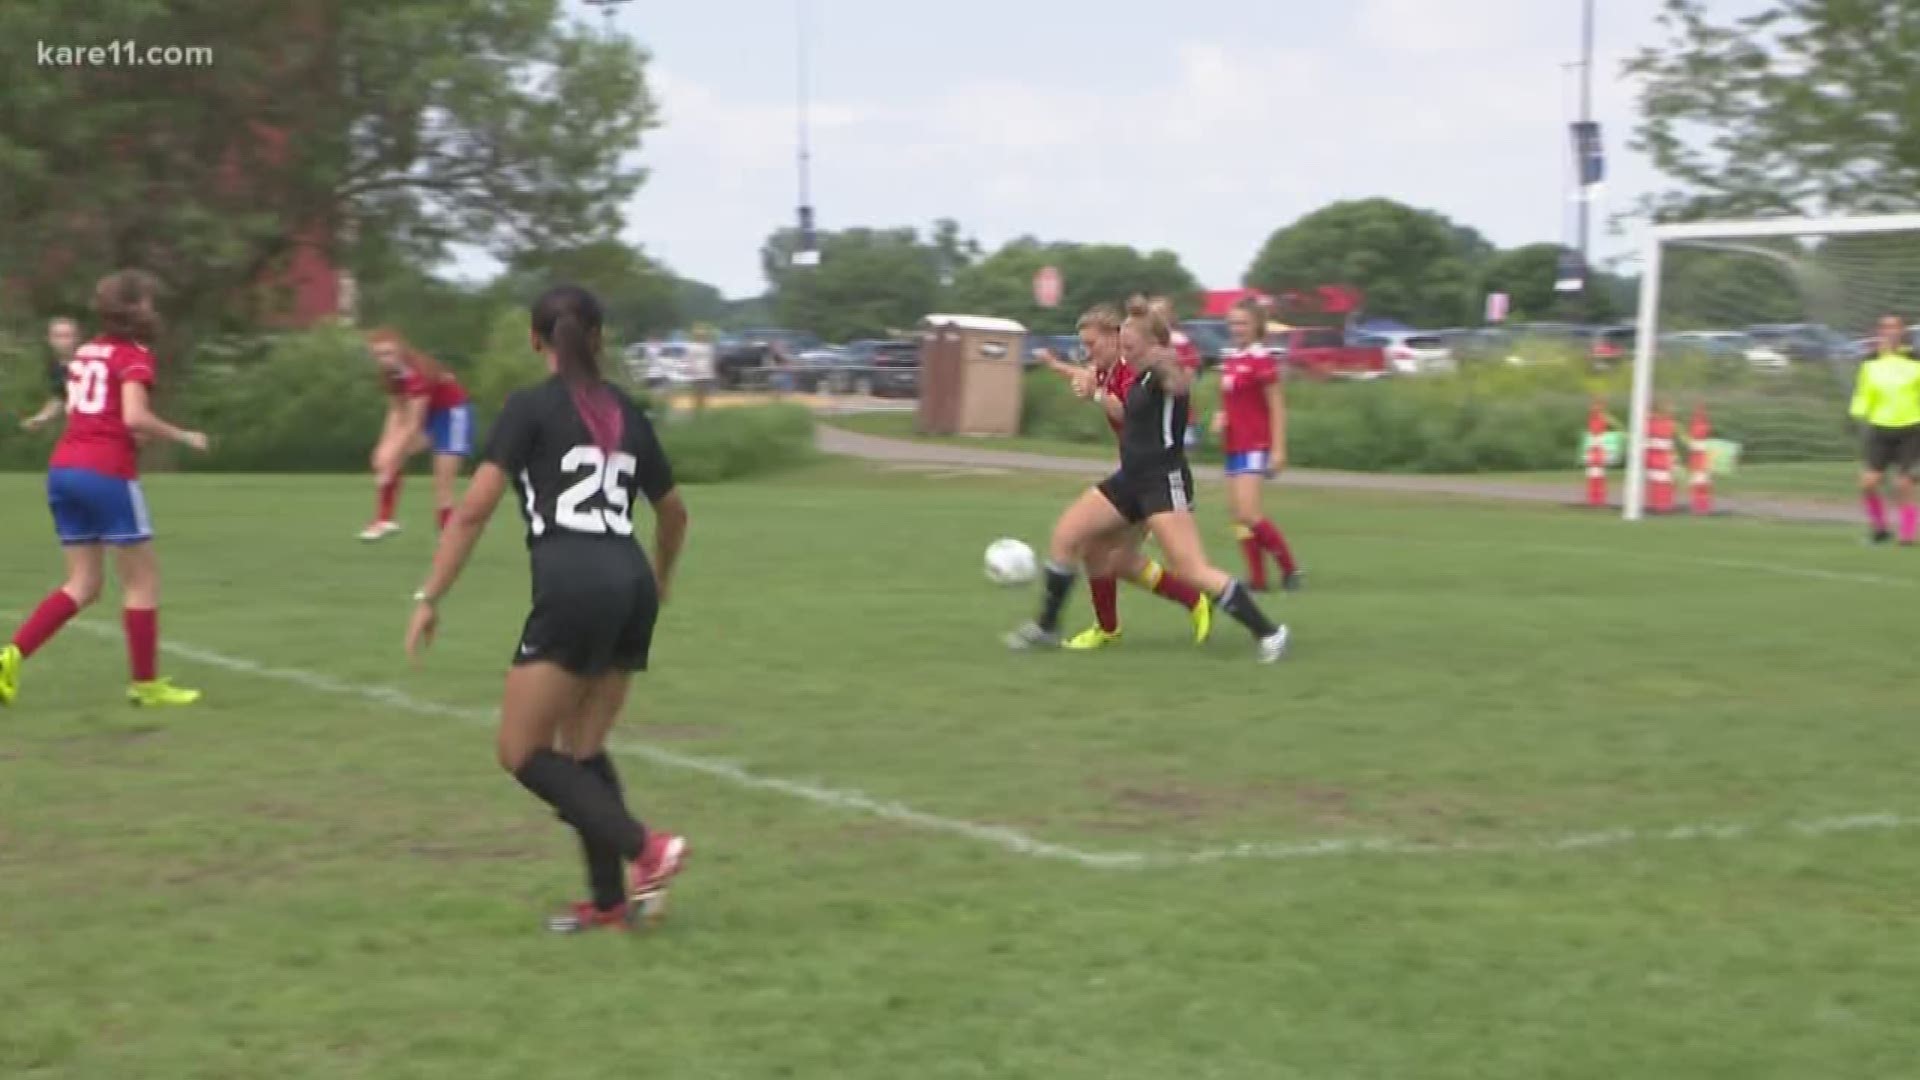 More than 1,000 youth soccer teams are in Blaine for the Target USA Cup, and playing in the middle of a heat wave. https://kare11.tv/2xWgDUU